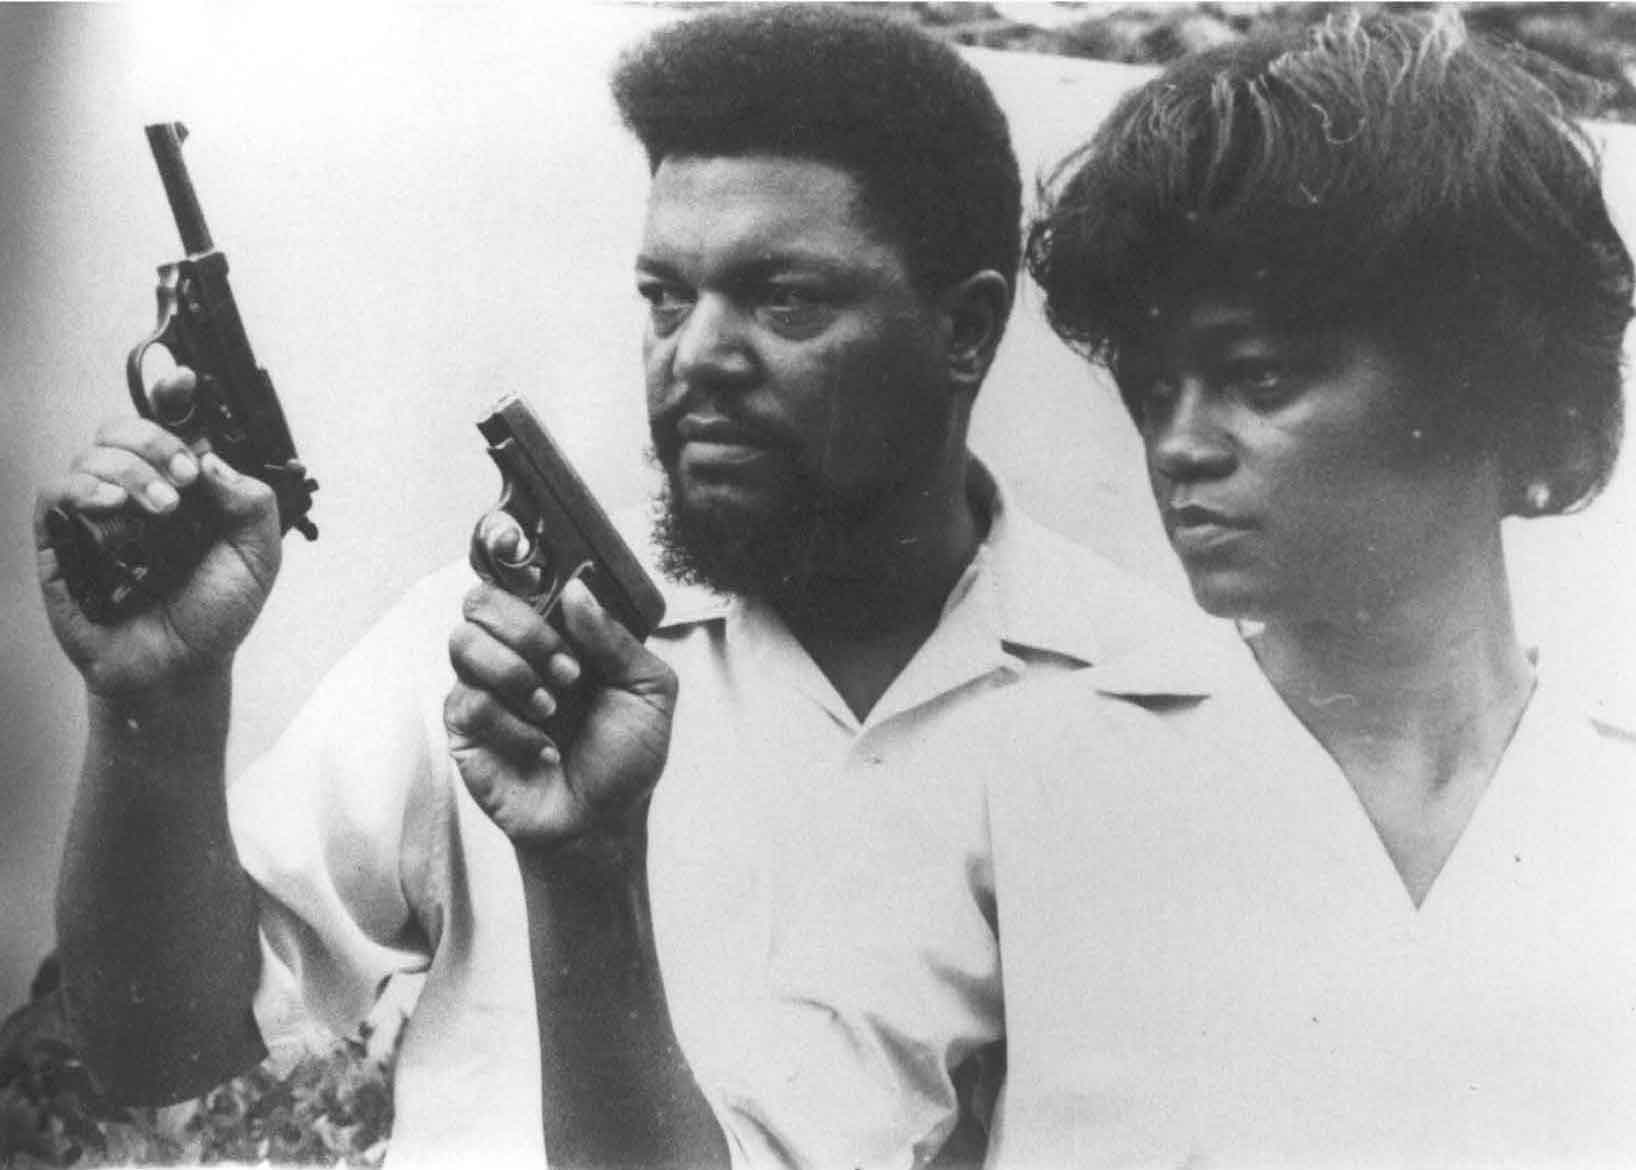 Robert and Mabel Williams holding pistols. Photo via Freedom Archives.